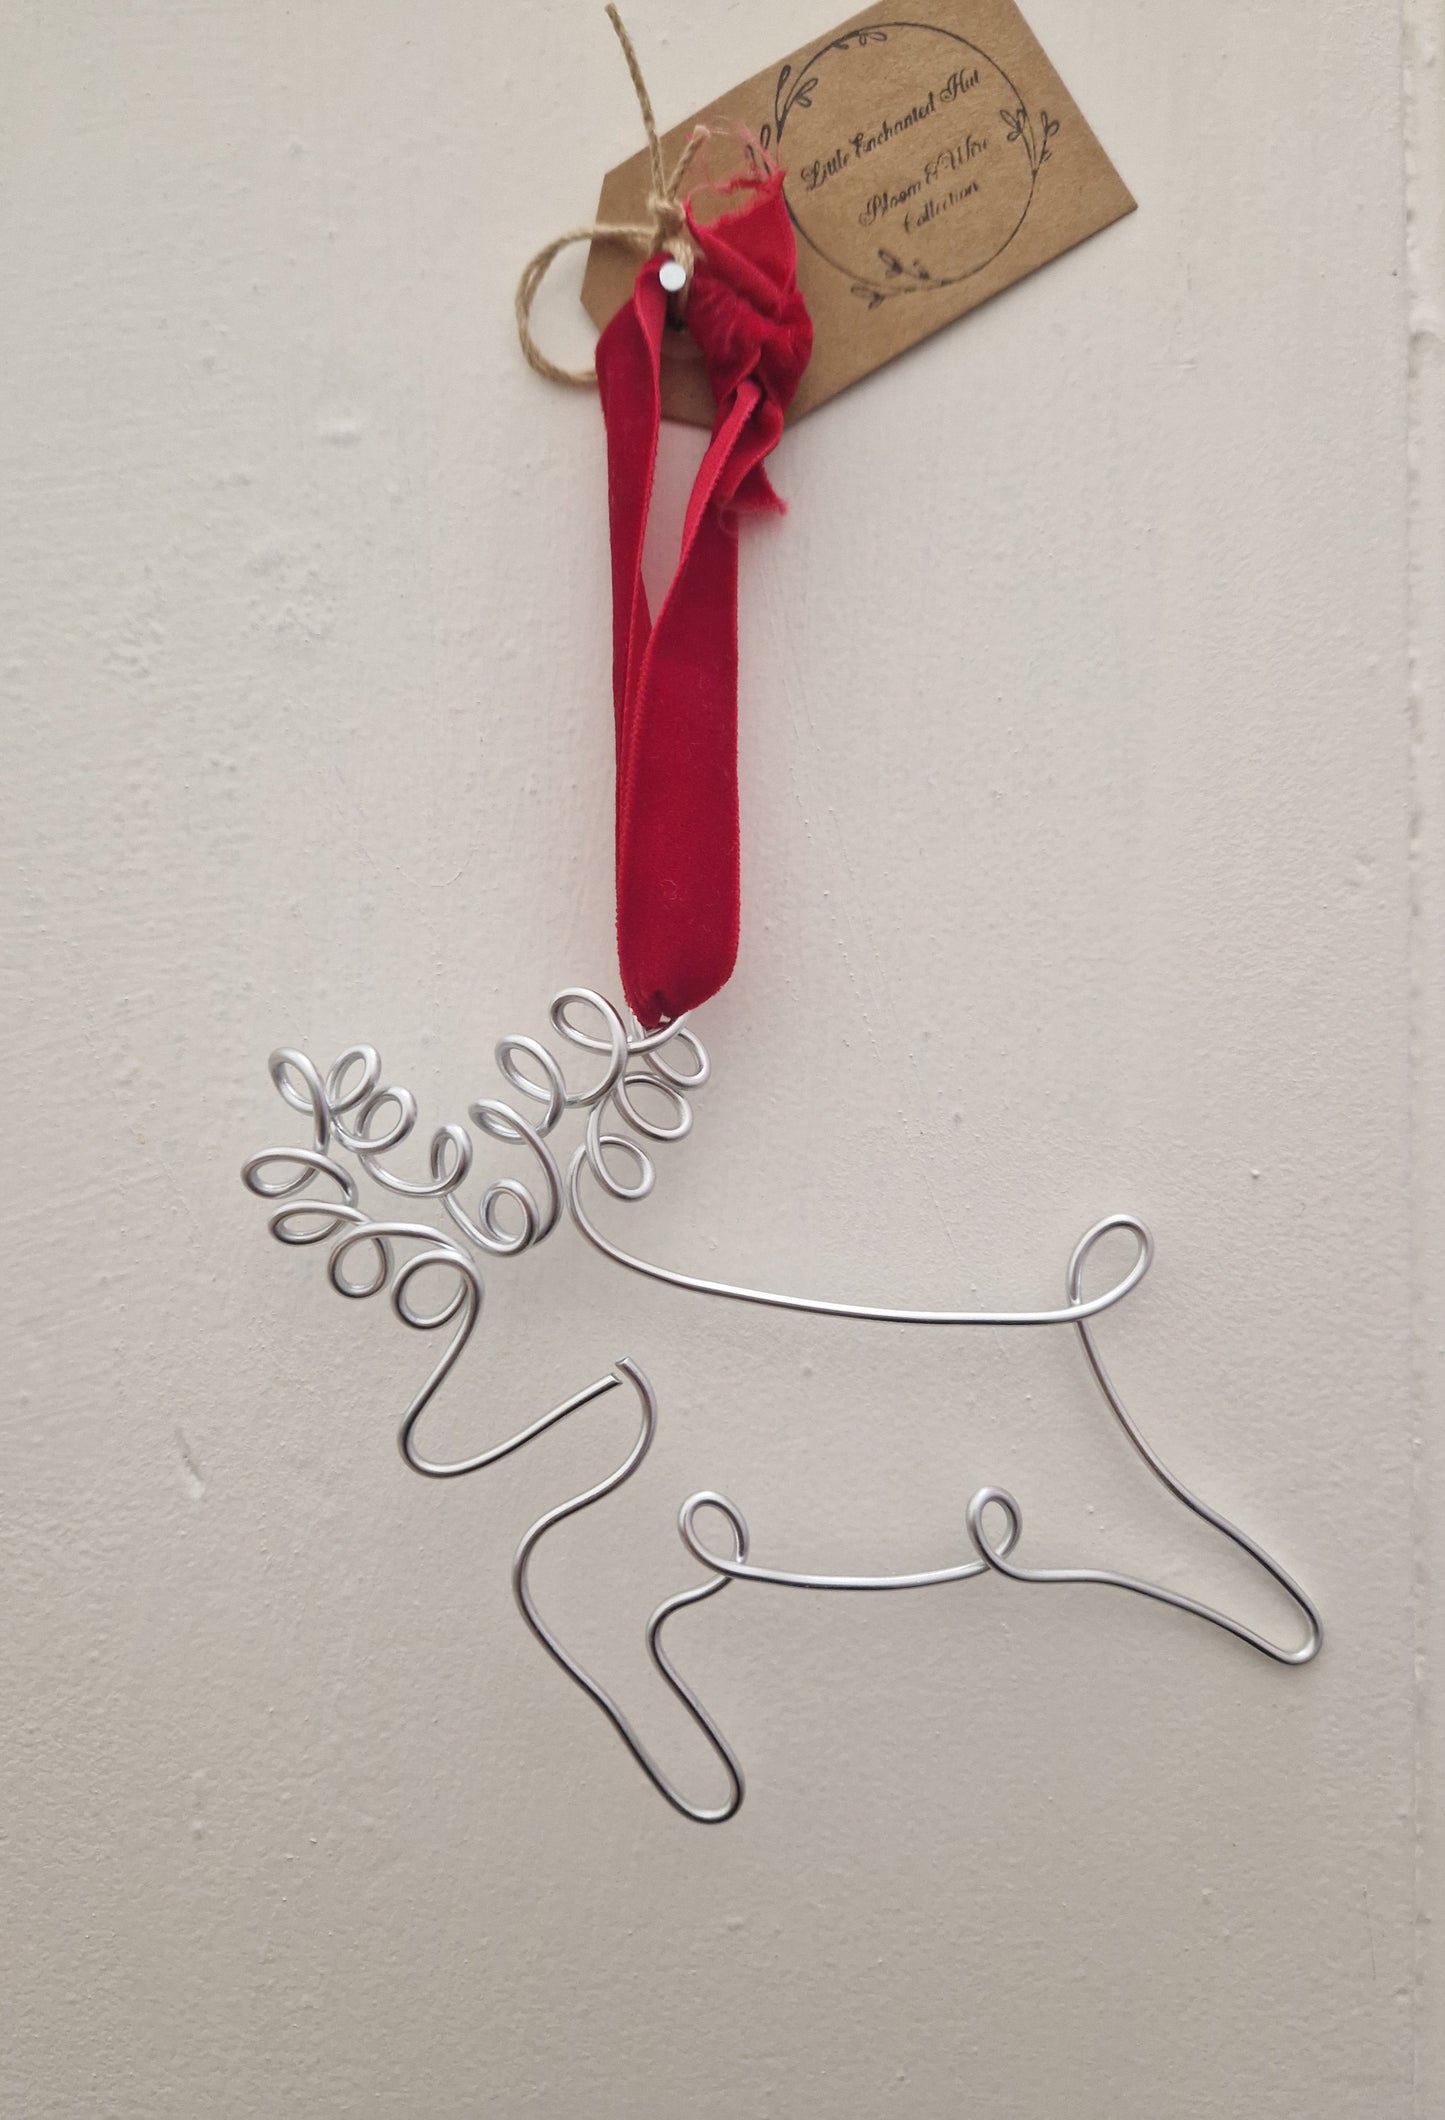 Handcrafted wire sculptured Christmas decorations.